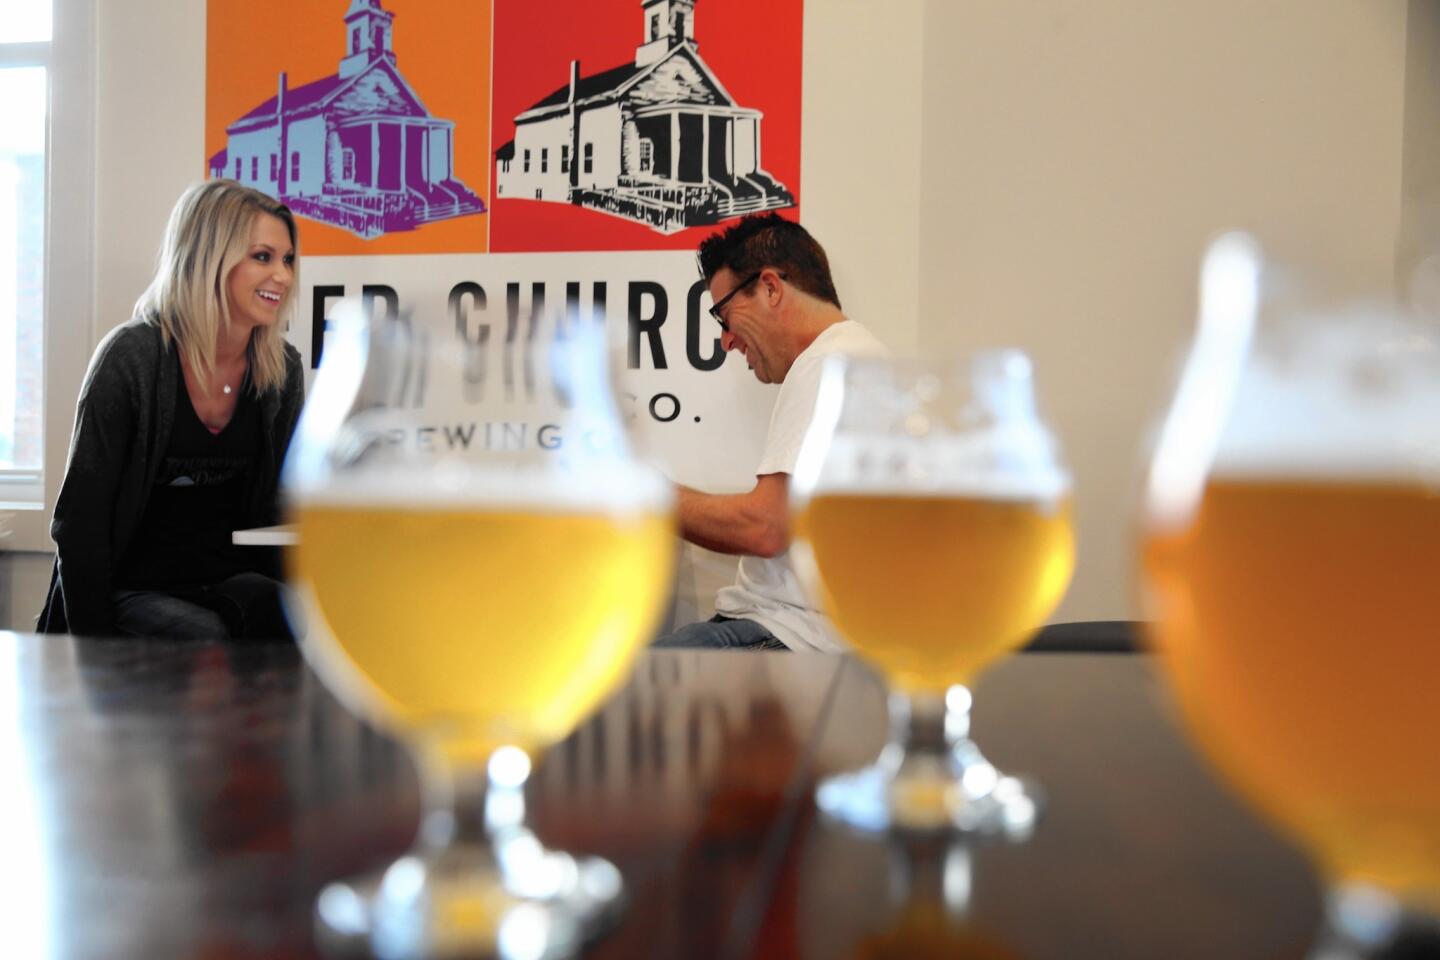 Customers Emily Delinski and David Szuch of South Bend, Ind., at Beer Church in New Buffalo, Mich.